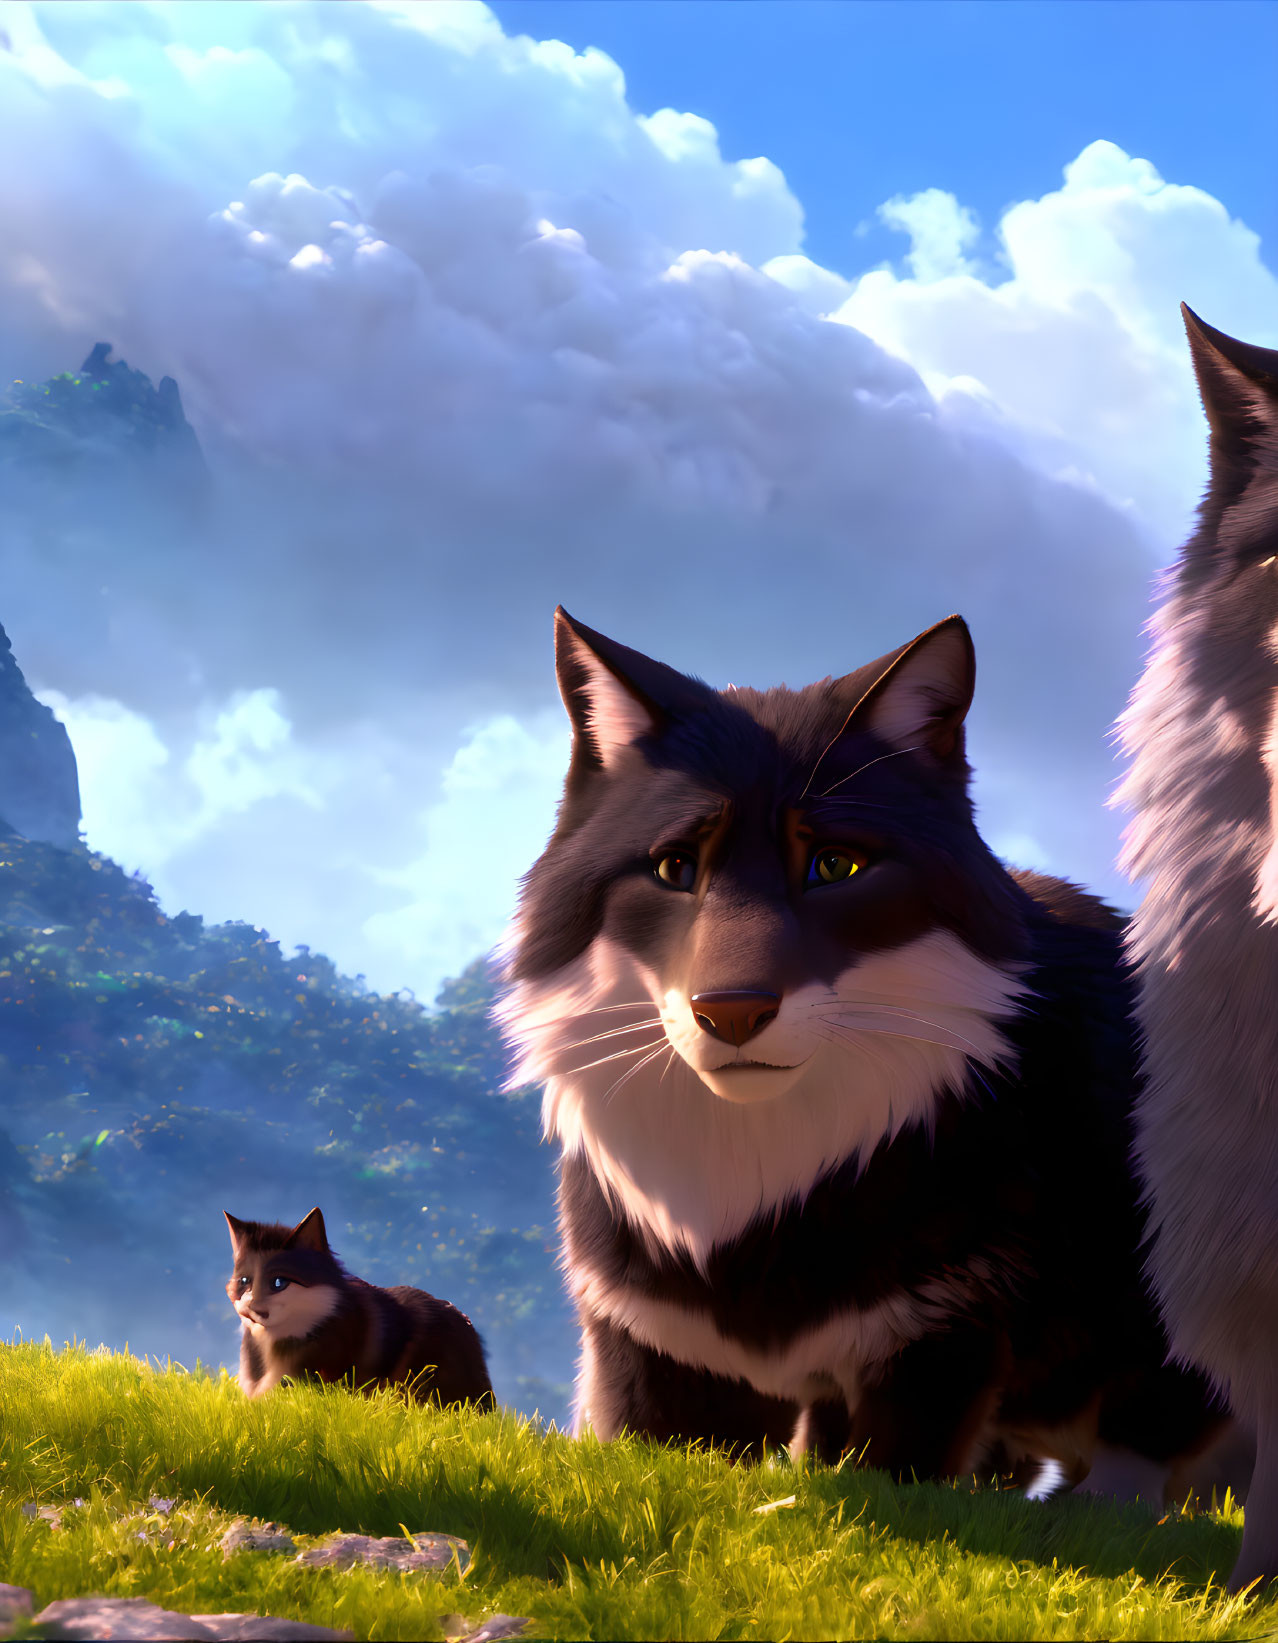 Two animated cats in lush field under dramatic cloudy sky